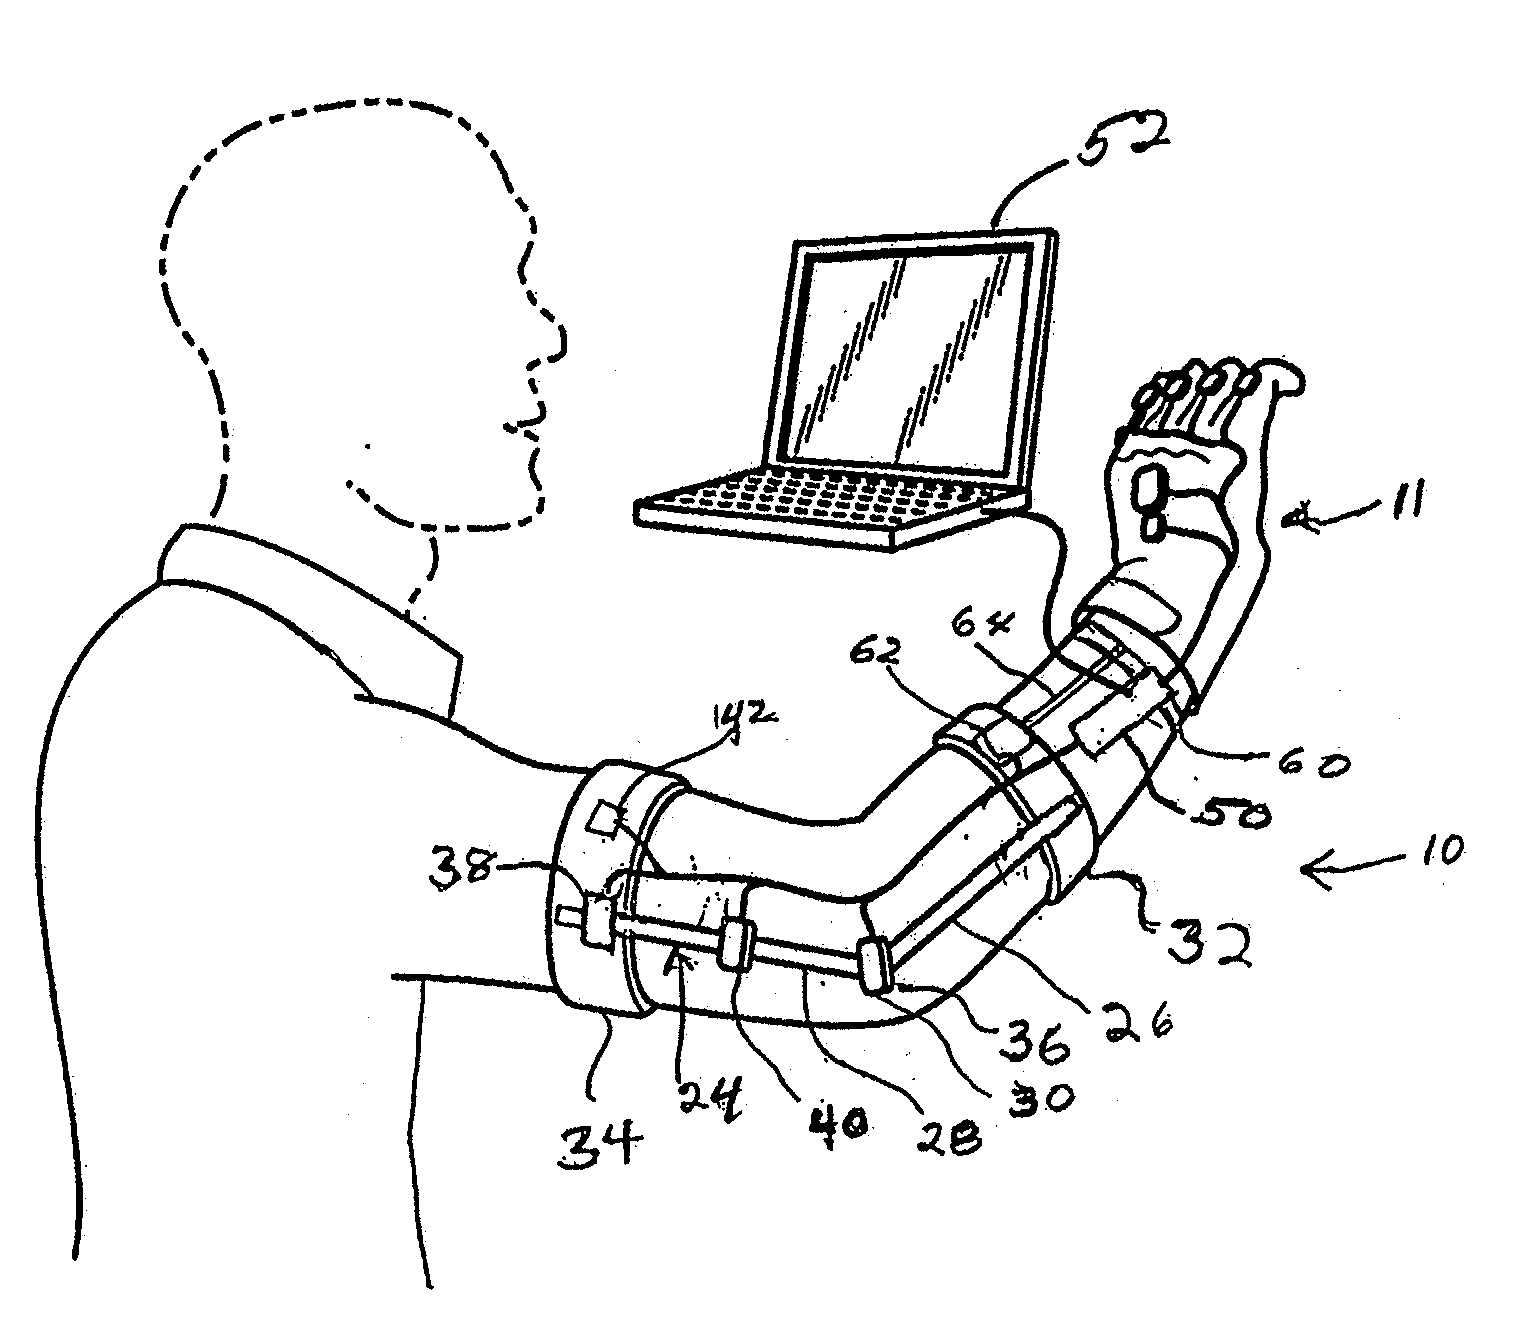 Method and apparatus for translating hand gestures